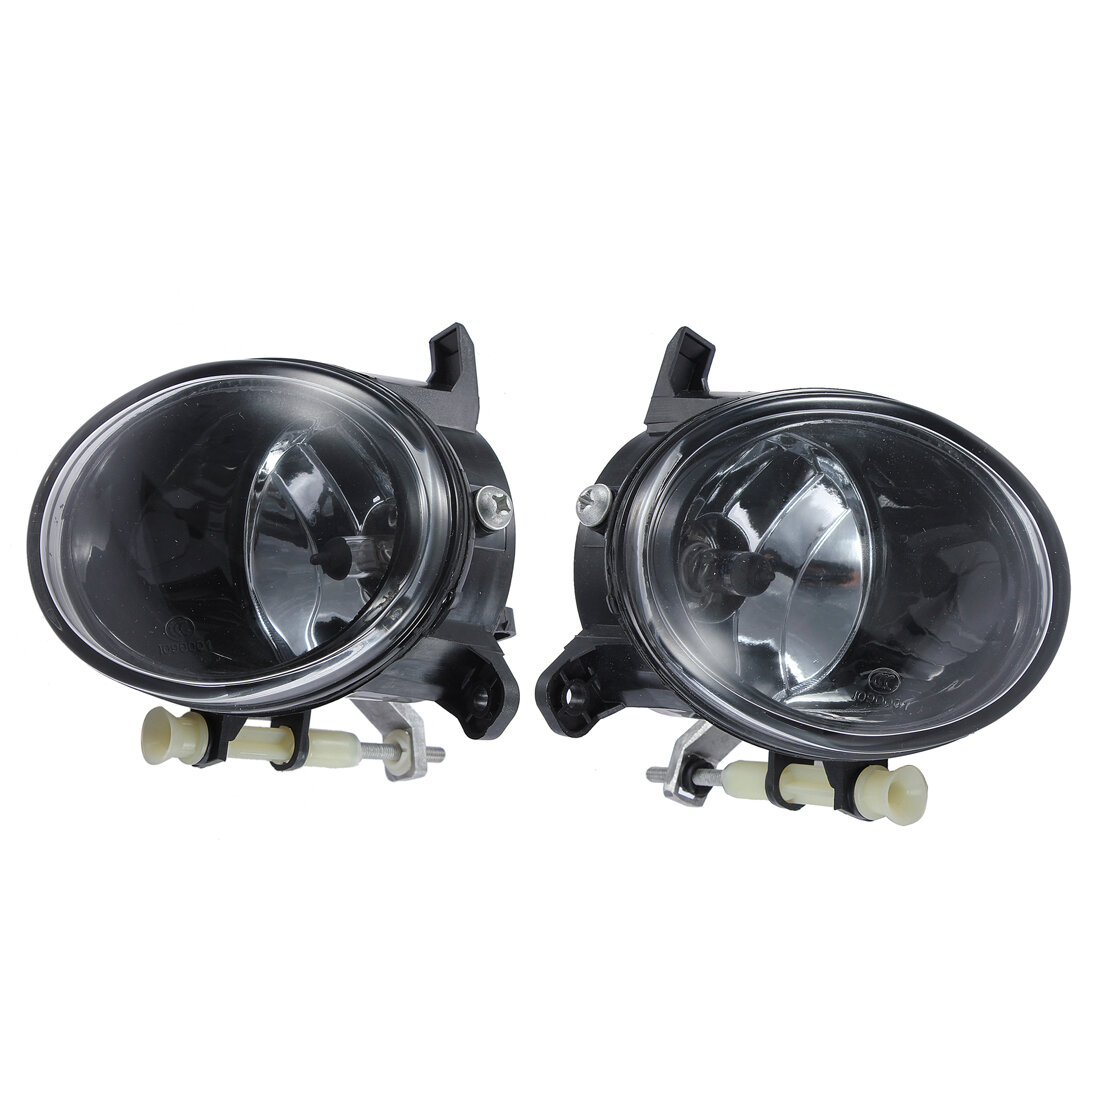 

Car Front Driving Fog Lamp Lights with H11 Halogen Bulb Left/Right For Audi A4 B8 Sedan A6 S6 Q5